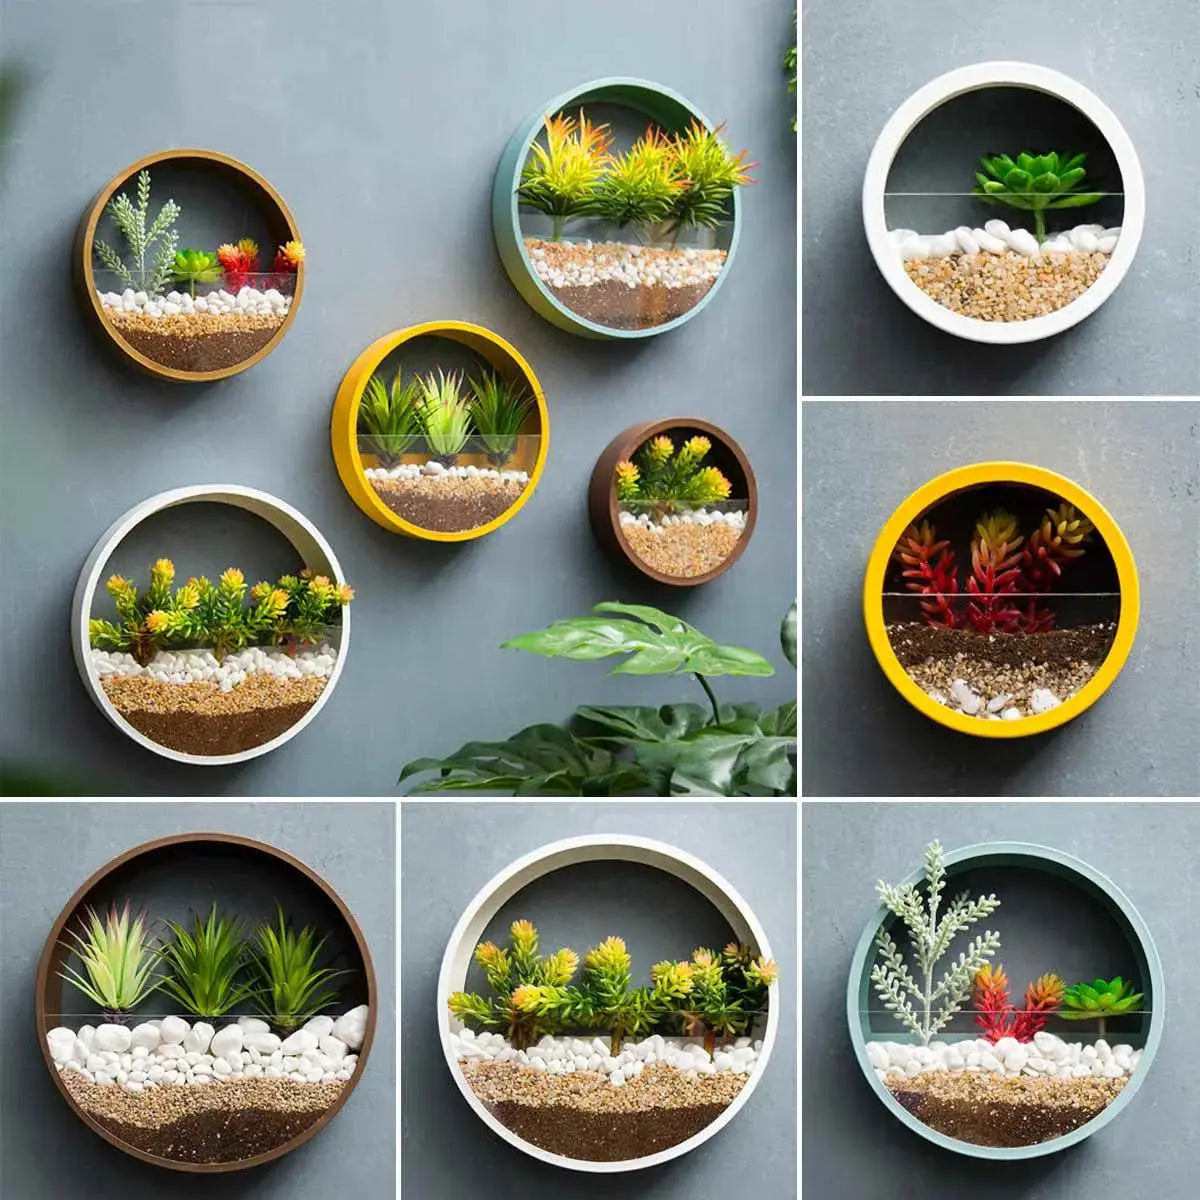 Round Iron Wall Vase Home Living Room Hanging Basket Decorative Flower Pot Wall Decor Succulent Plant Planters Art Glass Vases Shades Array